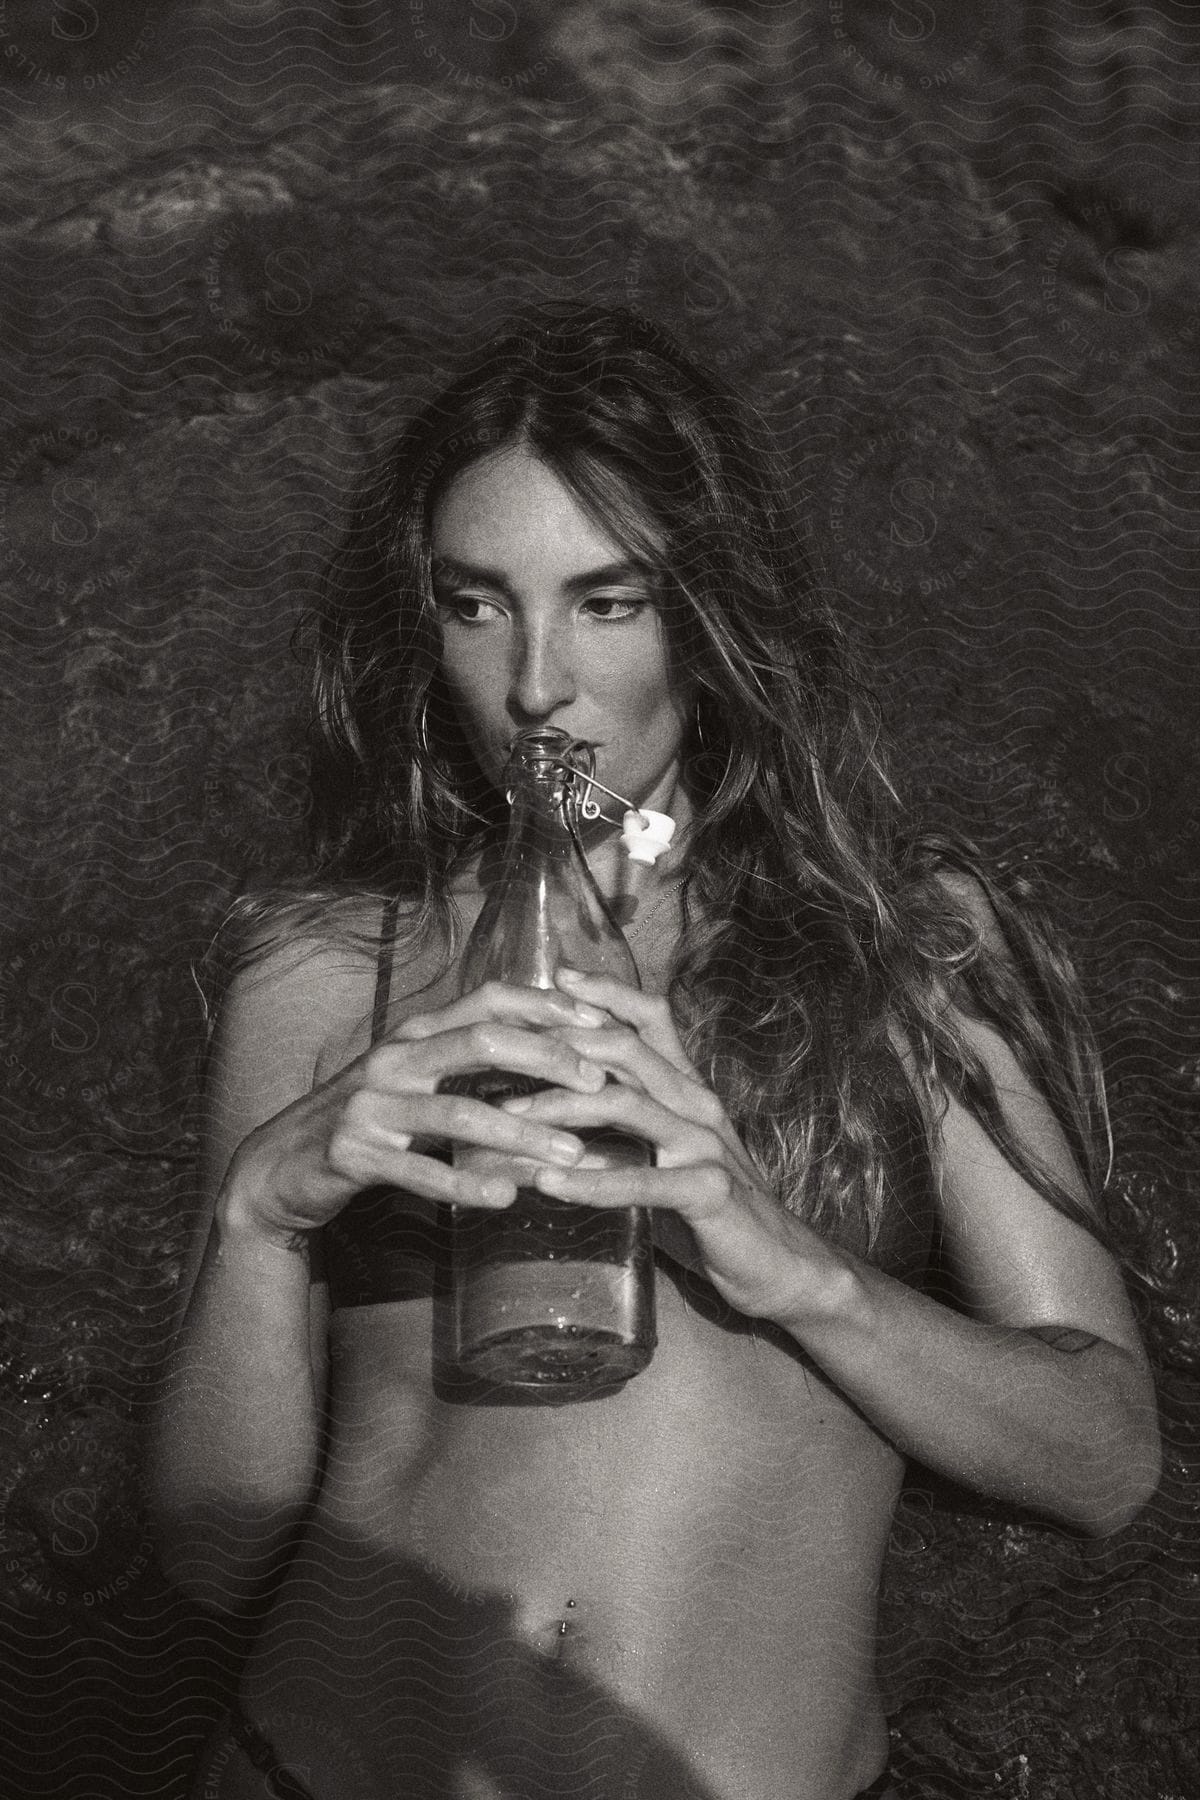 Woman with brown wavy hair and bra lying down on rock holding a glass bottle